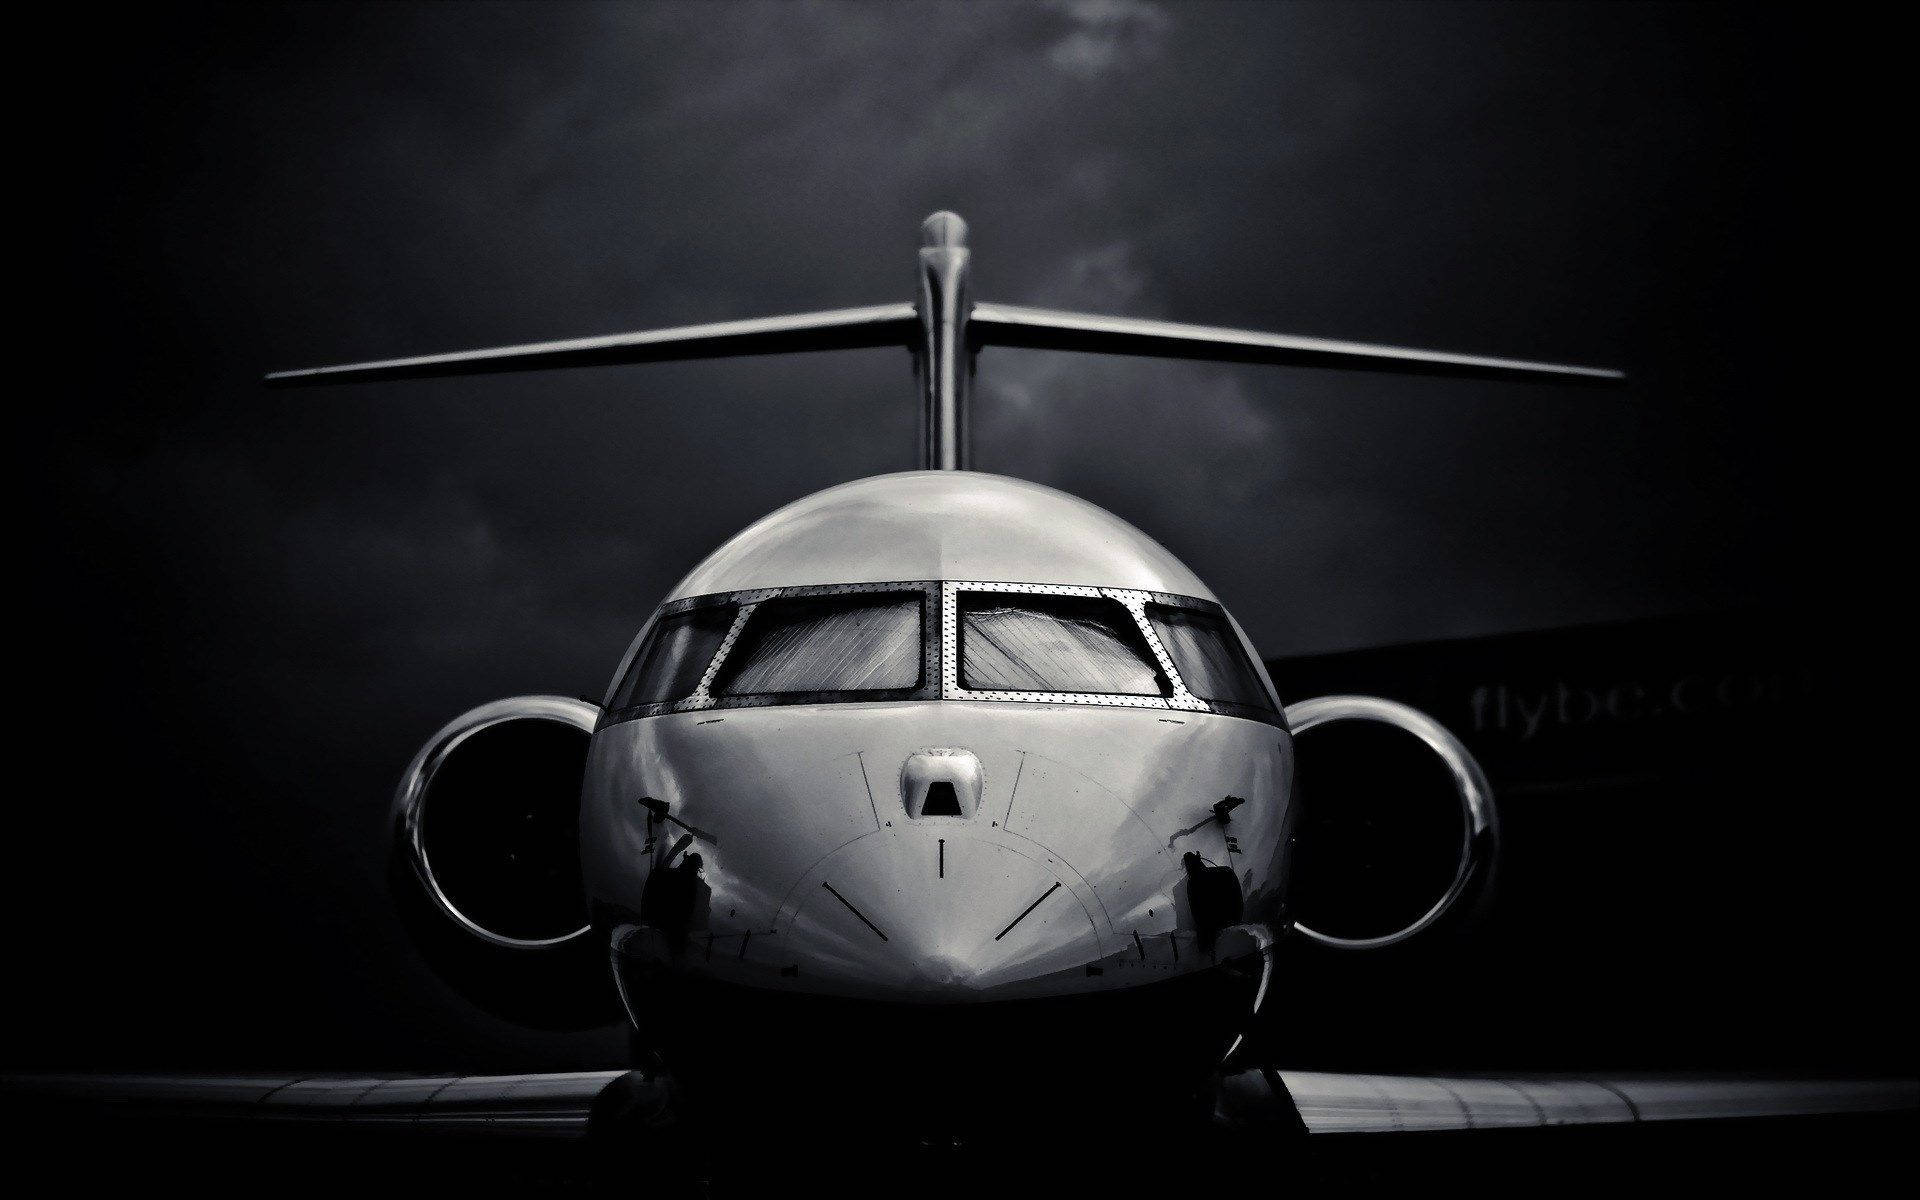 Black And White Airplane Wallpapers